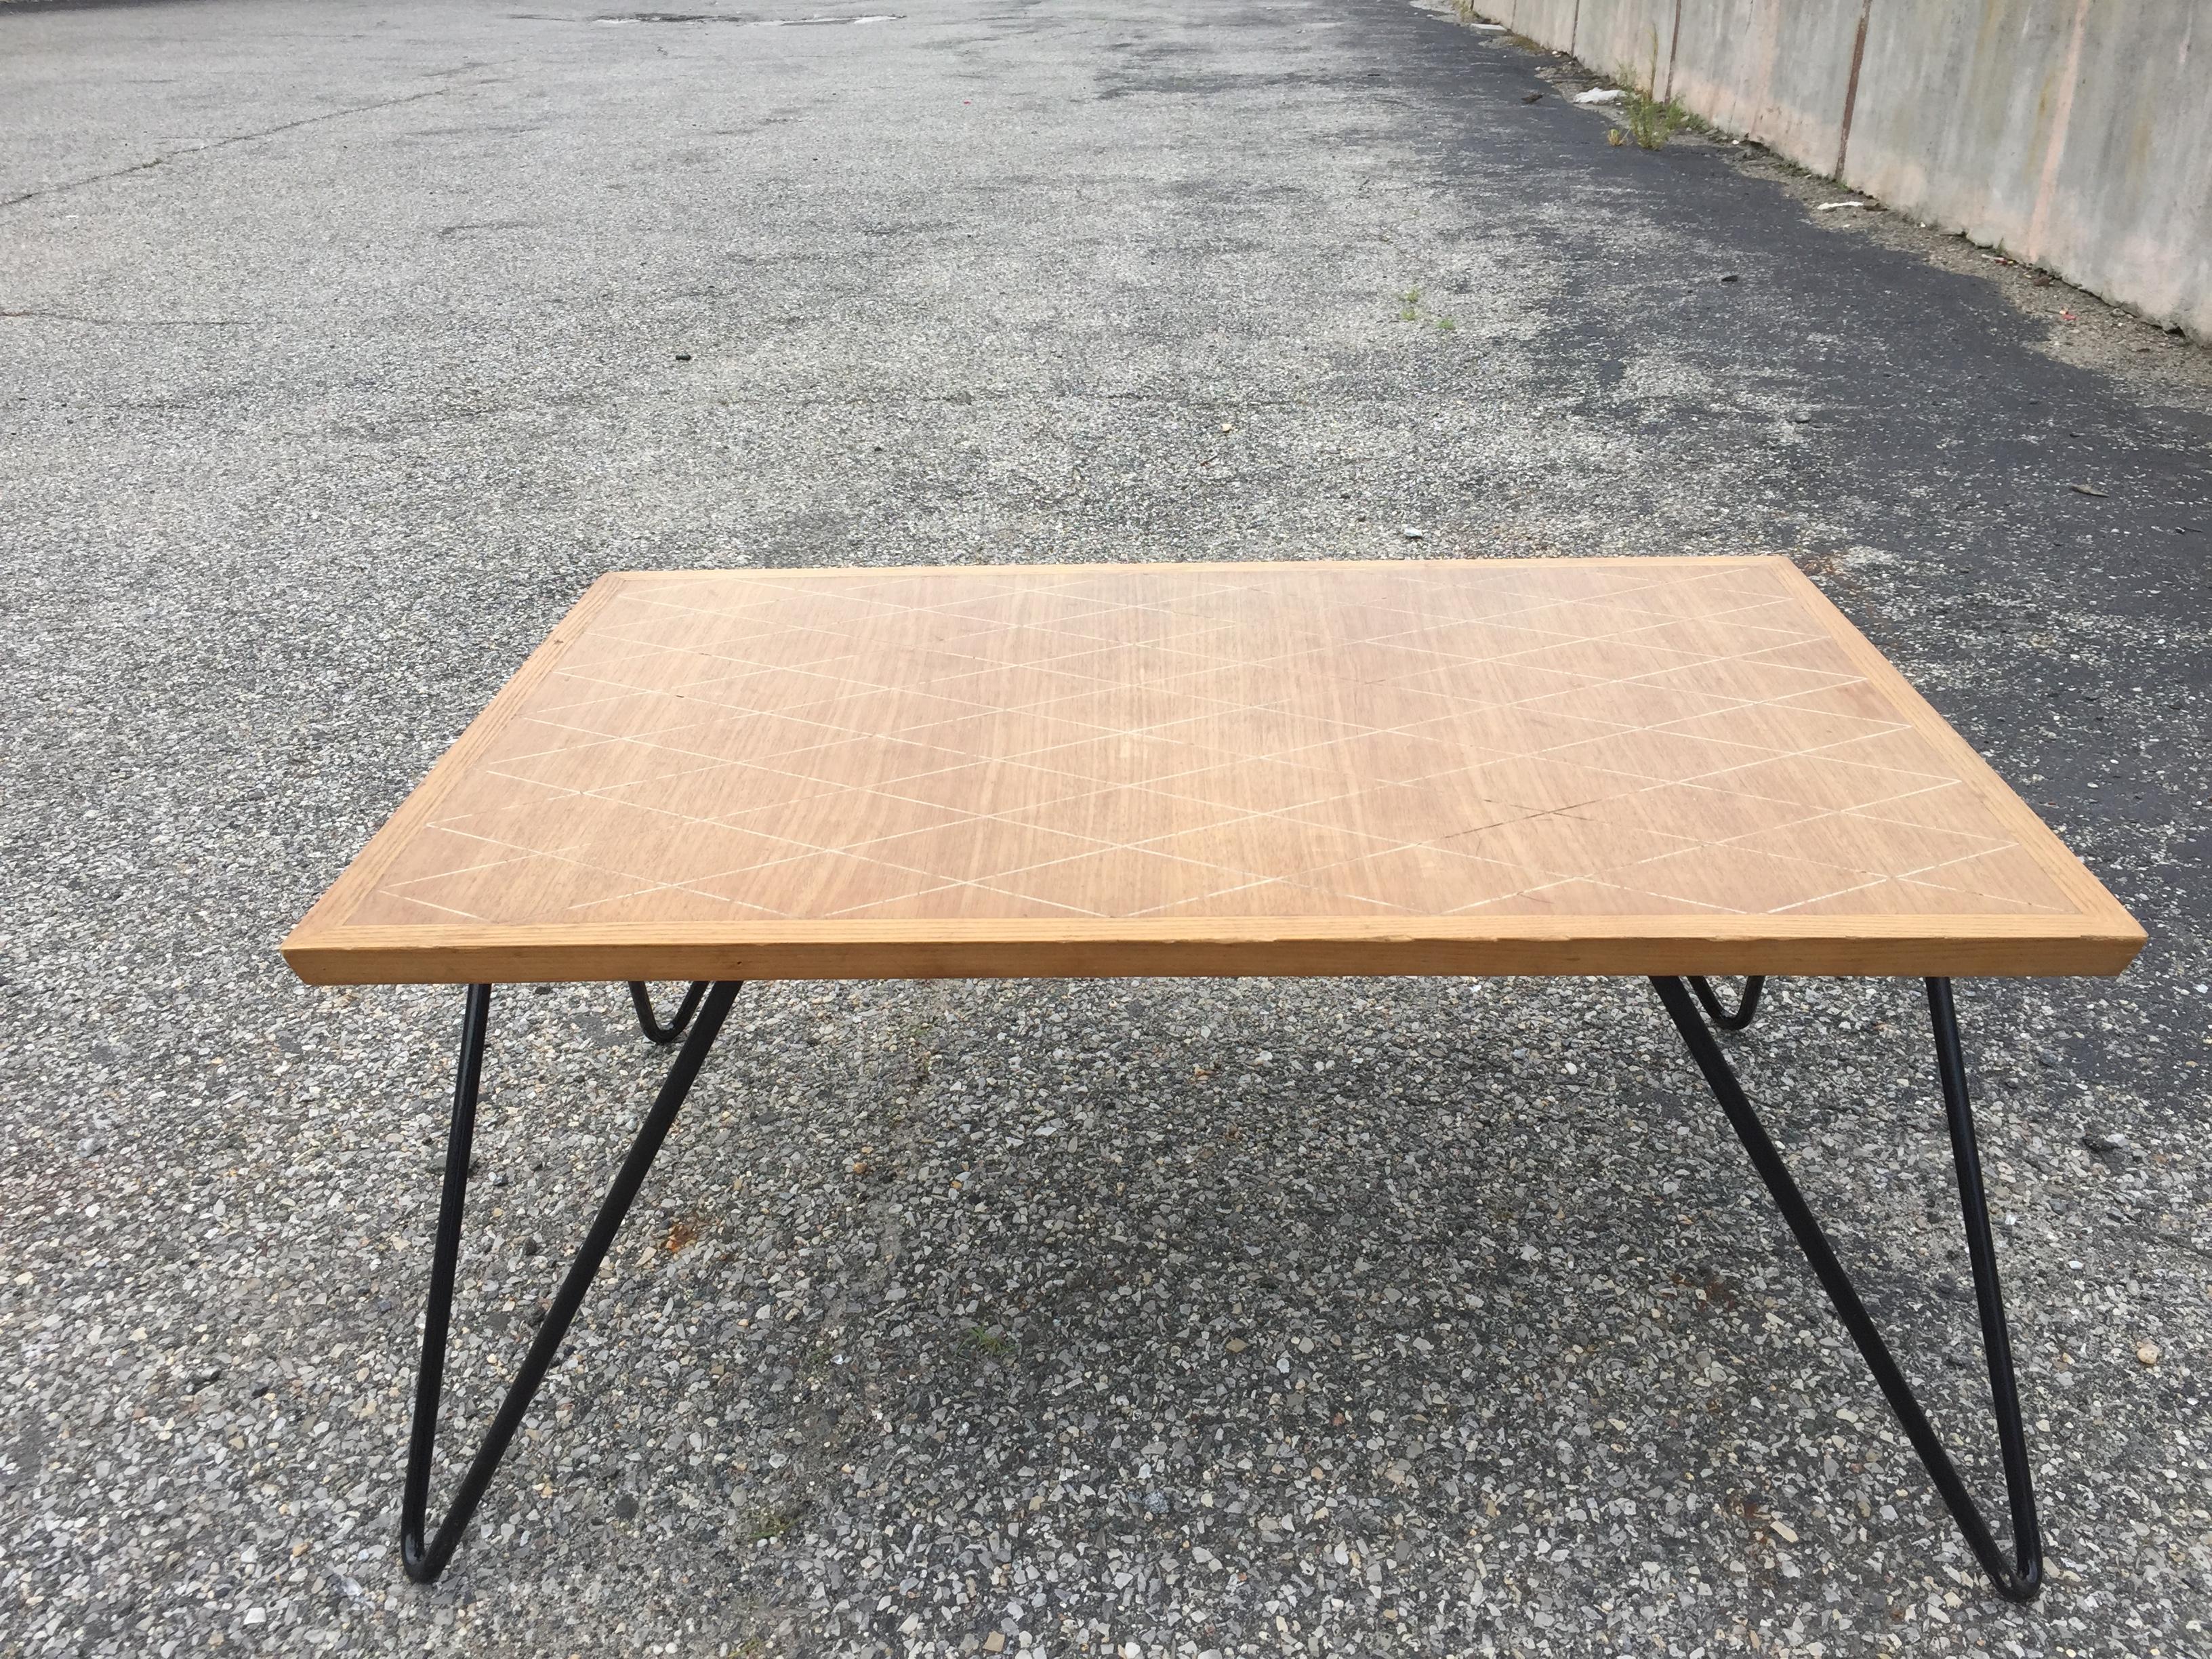 Aluminum base rectangle coffee table attributed to Poul Kjaerholm, 5/8